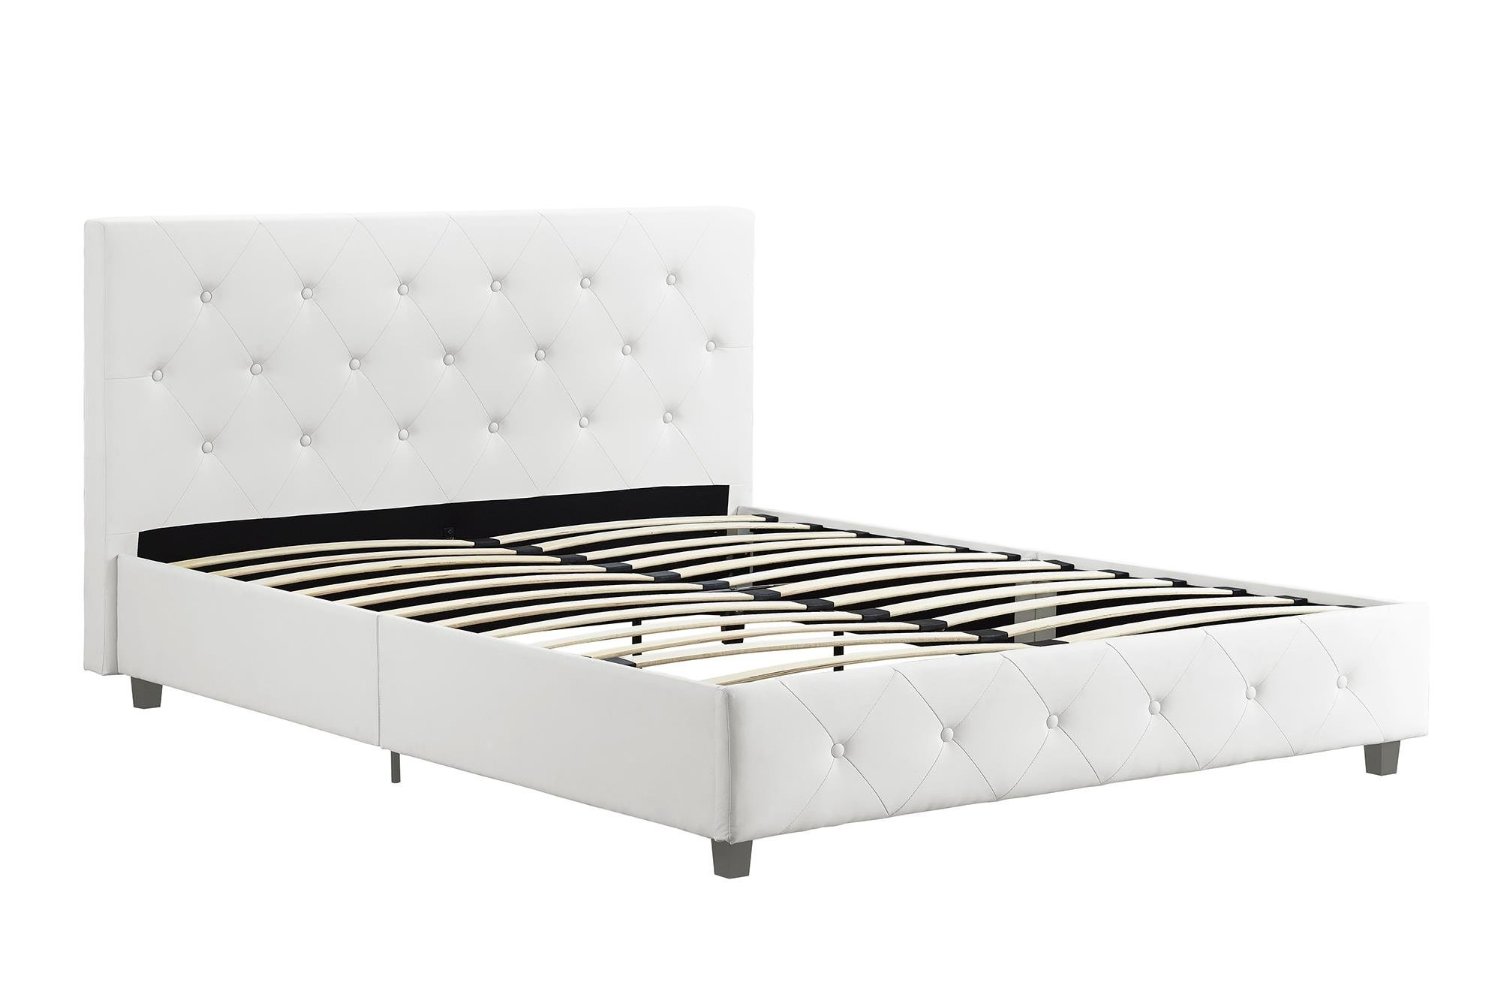 DHP Platform Bed, Dakota Faux Leather Tufted Upholstered Platform Bed - Includes Tufted Upholstered Headboard and Side Rails, Queen Platform Bed - White